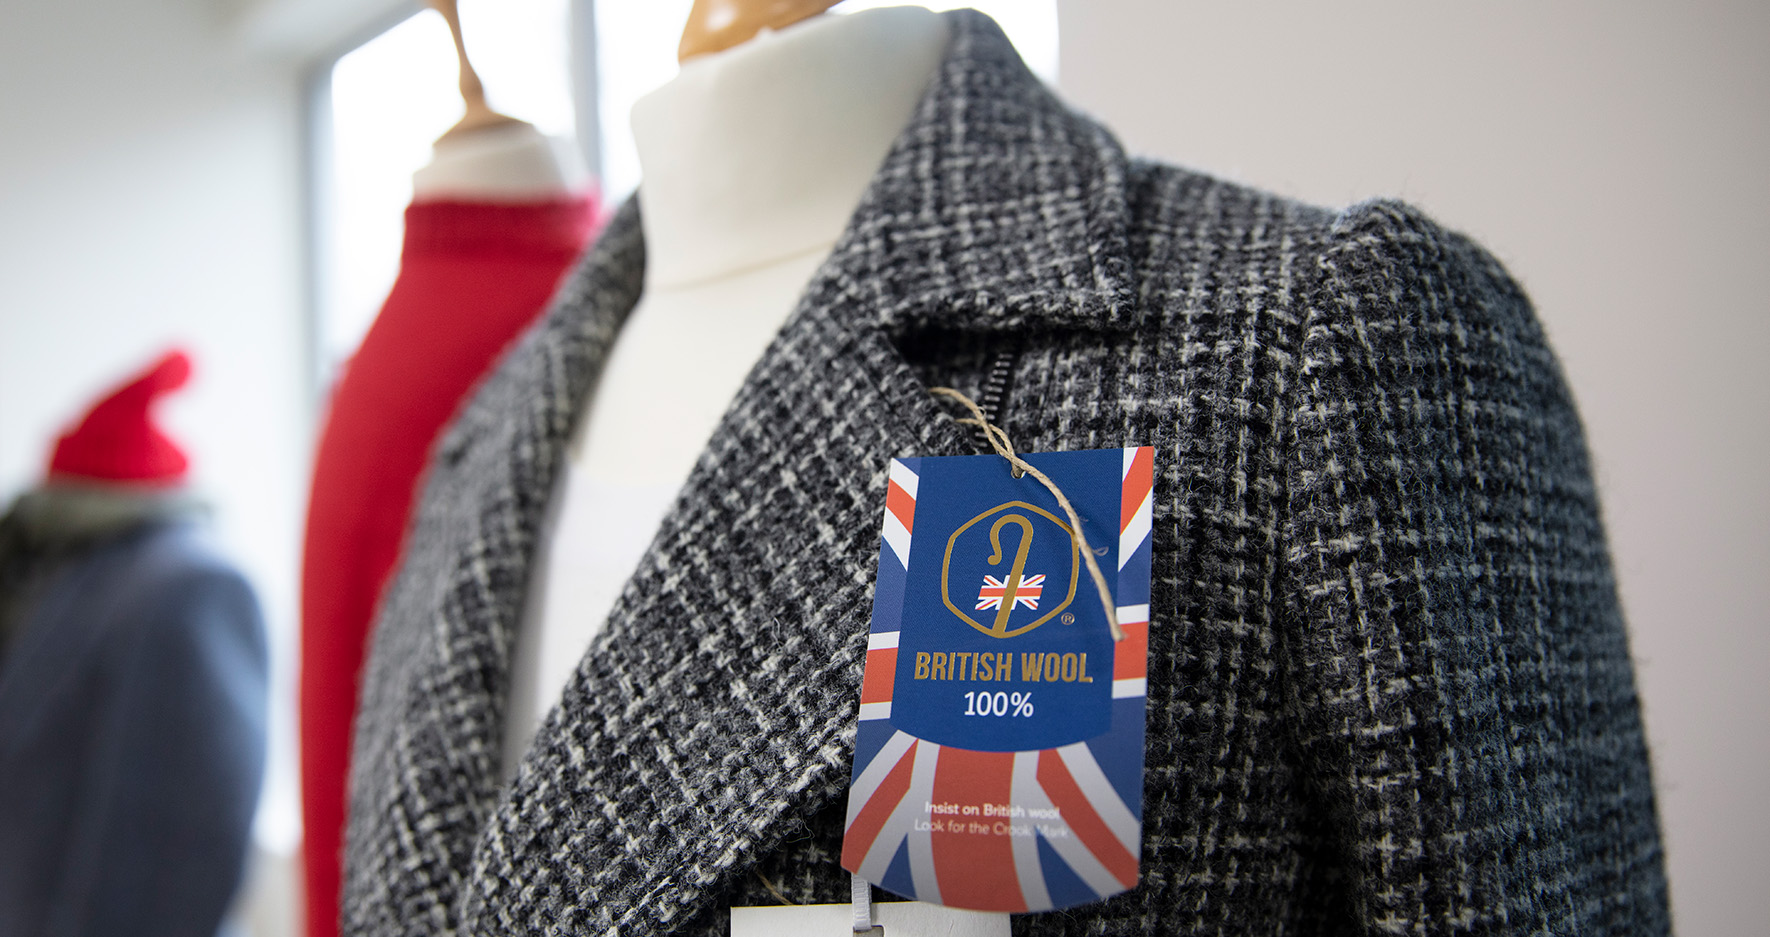 Clothing made by British Wool. 